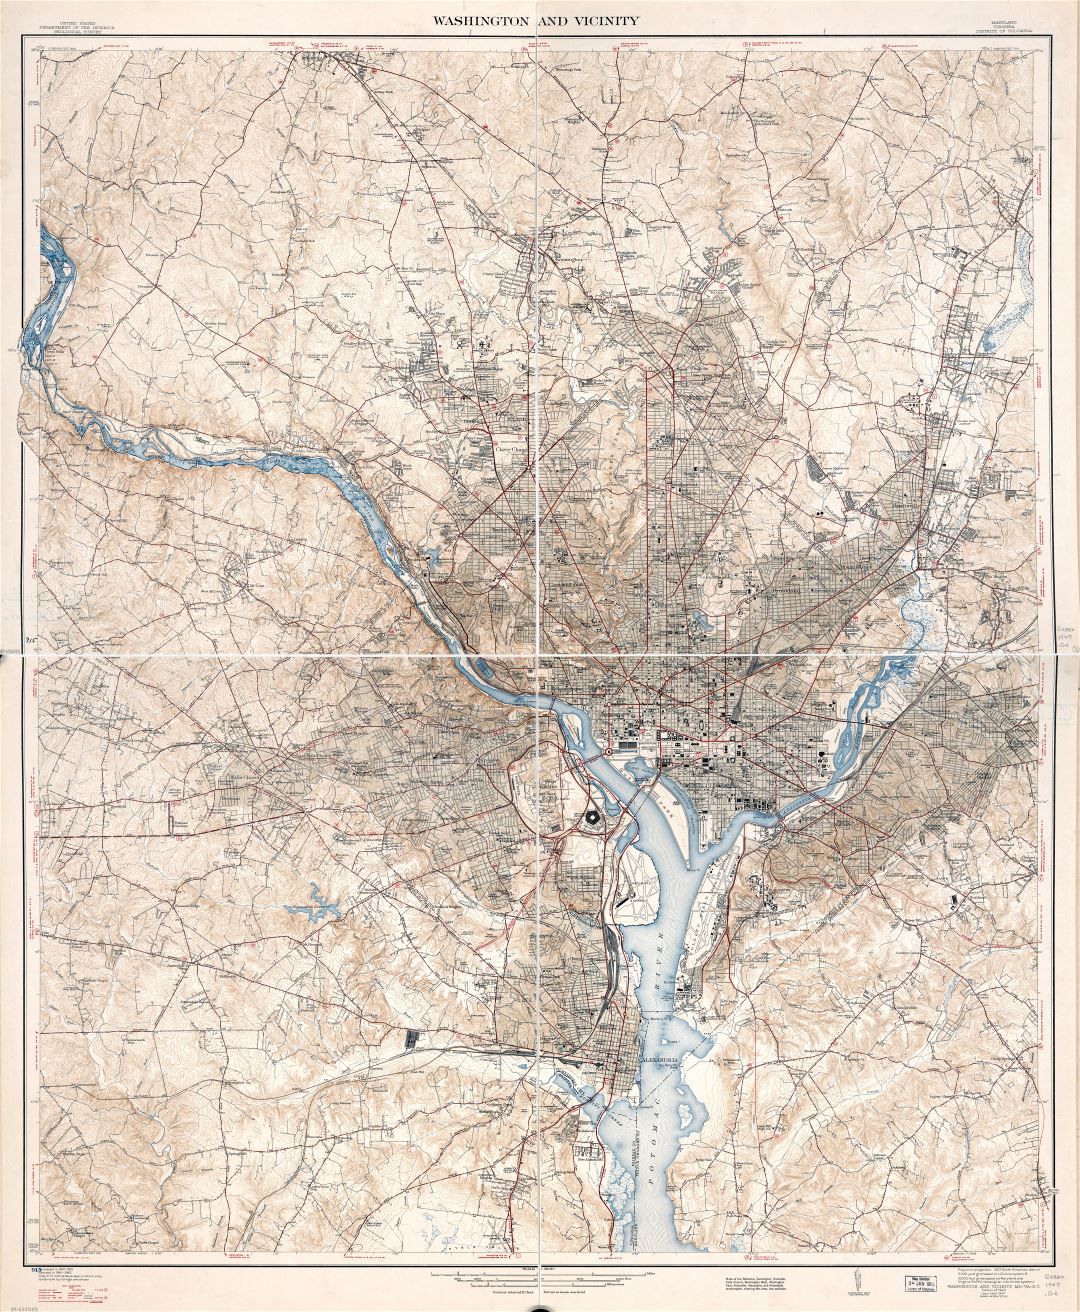 Large scale detailed map of Washington and vicinity, District of Columbia, Maryland, Virginia - 1947